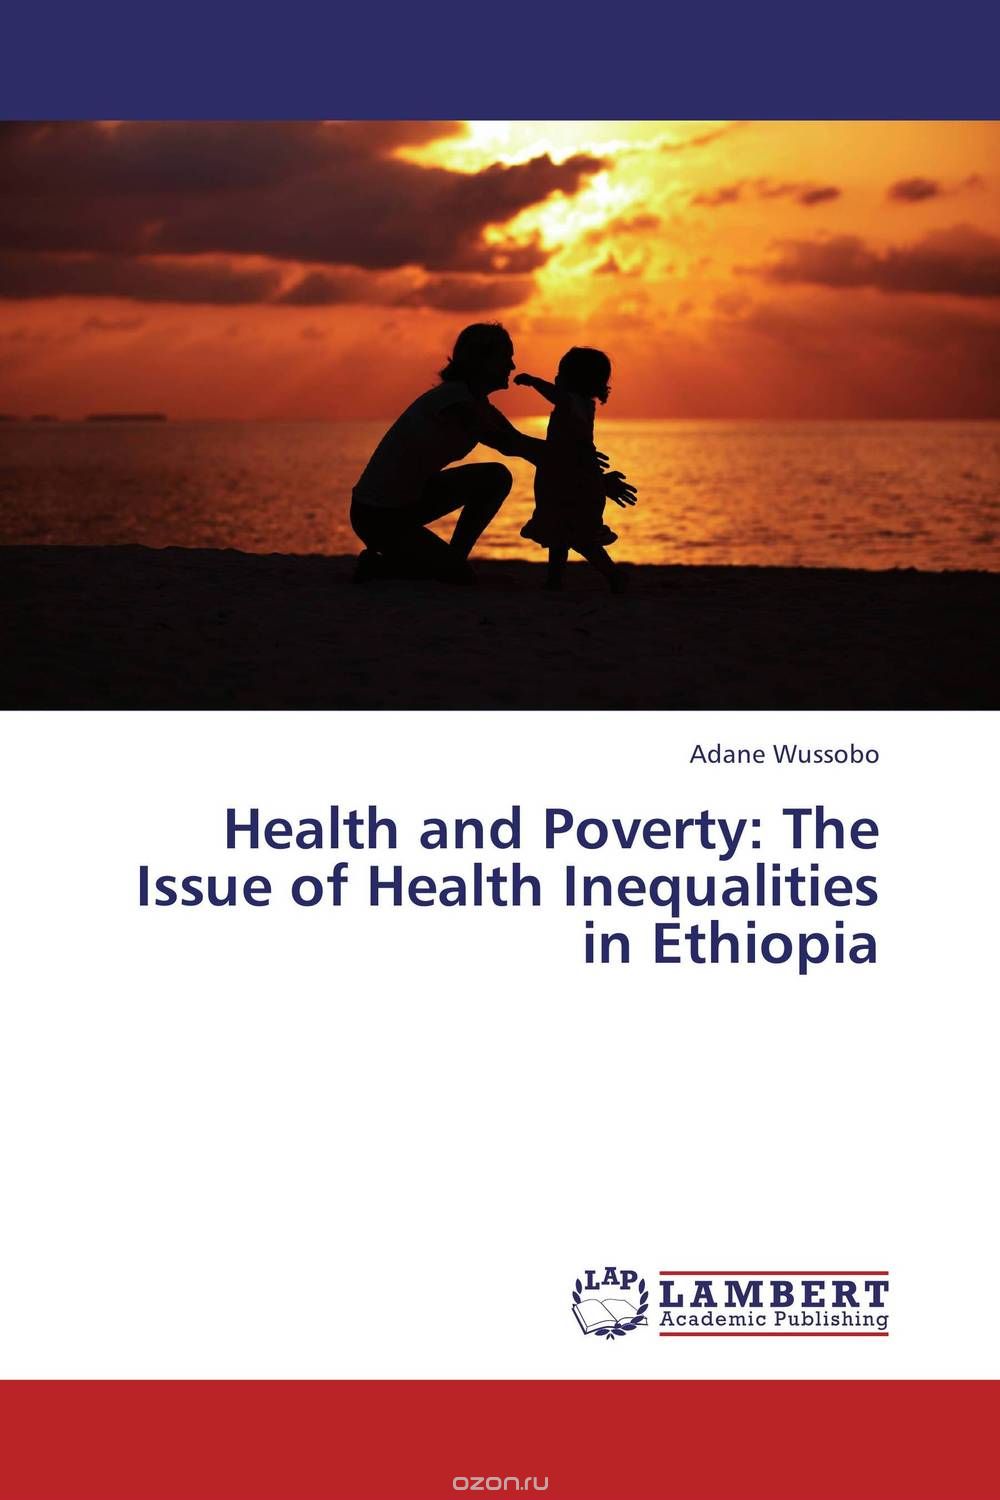 Health and Poverty: The Issue of Health Inequalities in Ethiopia